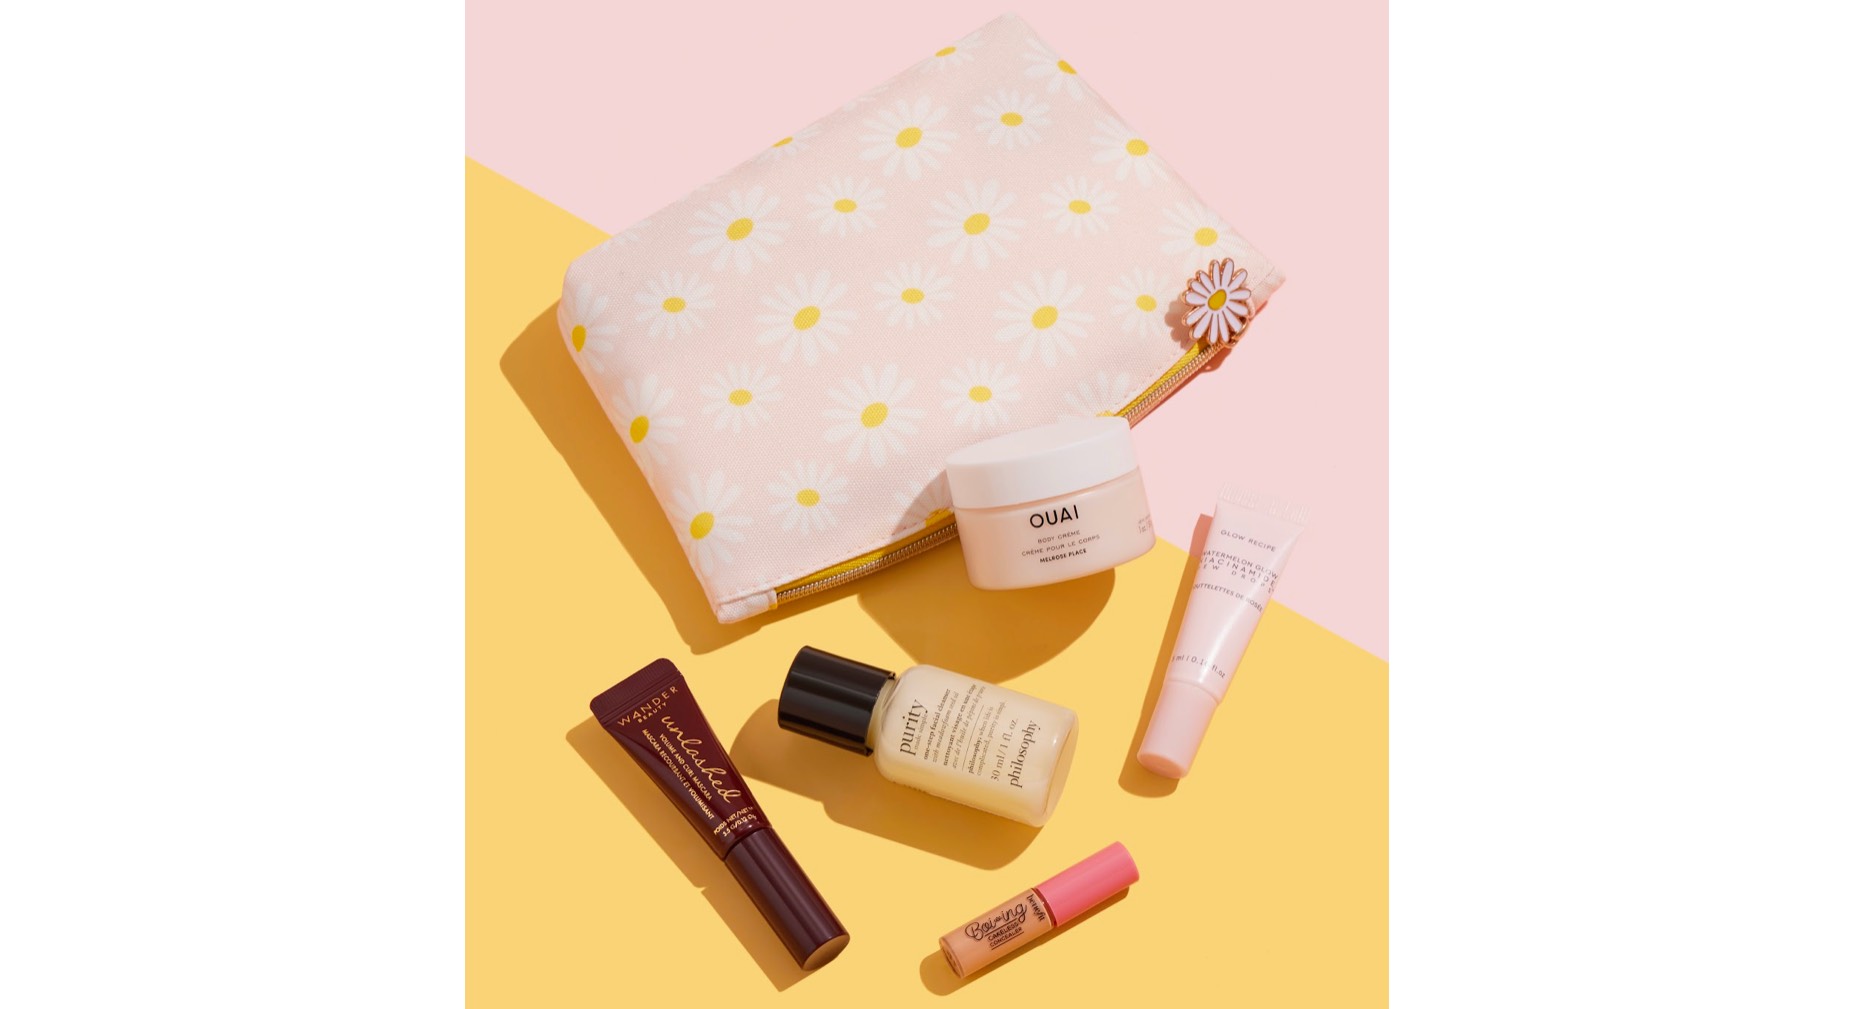 IPSY Launches April Glam Bag Ahead of Earth Month